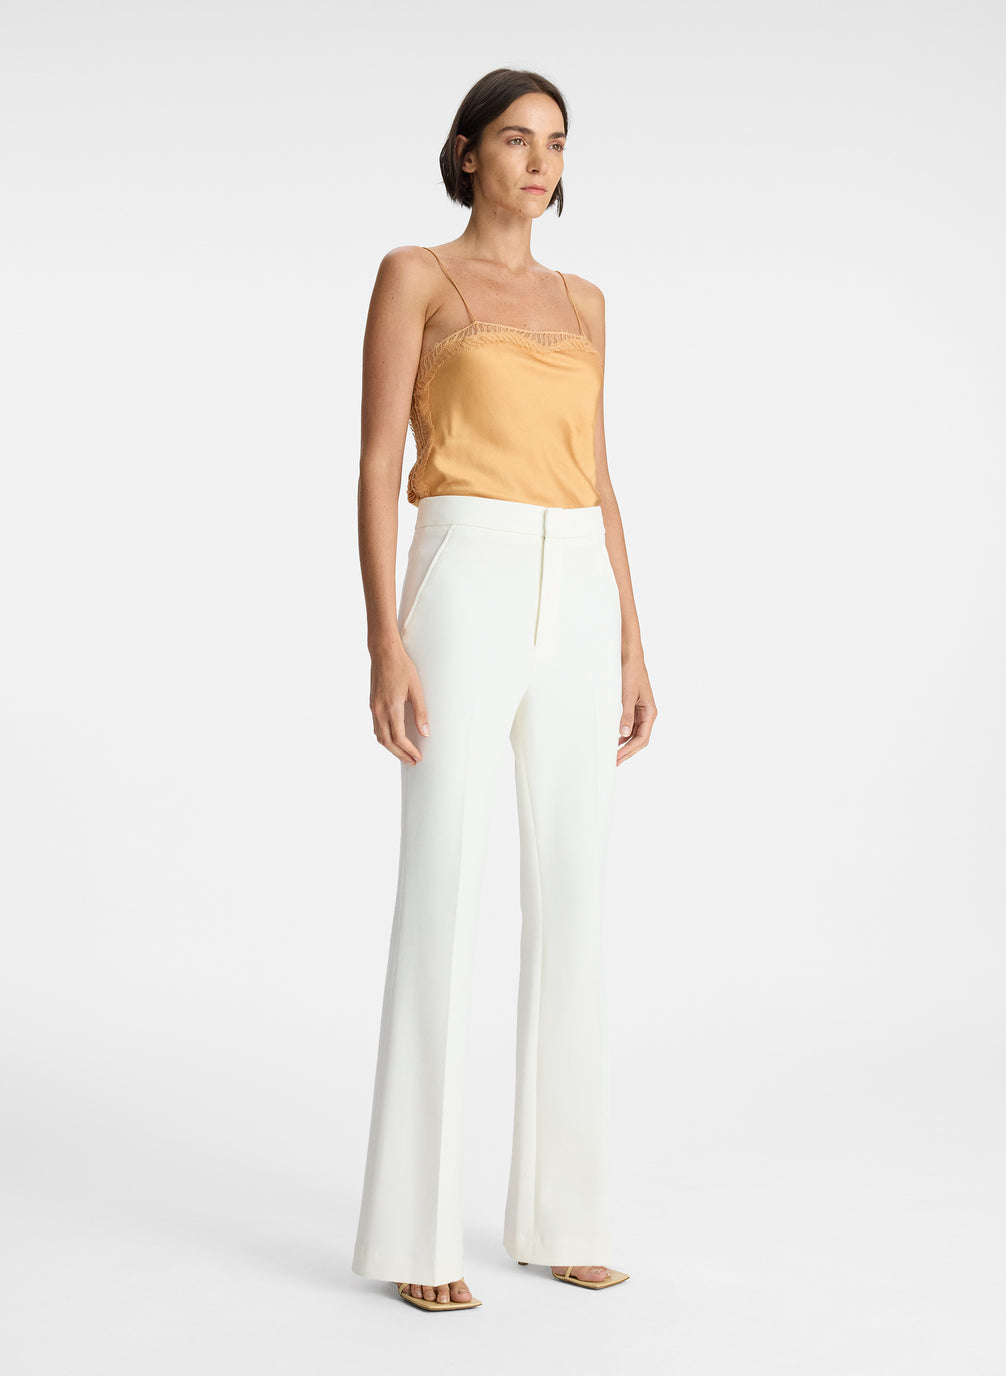 side view of woman wearing beige camisole and white pants